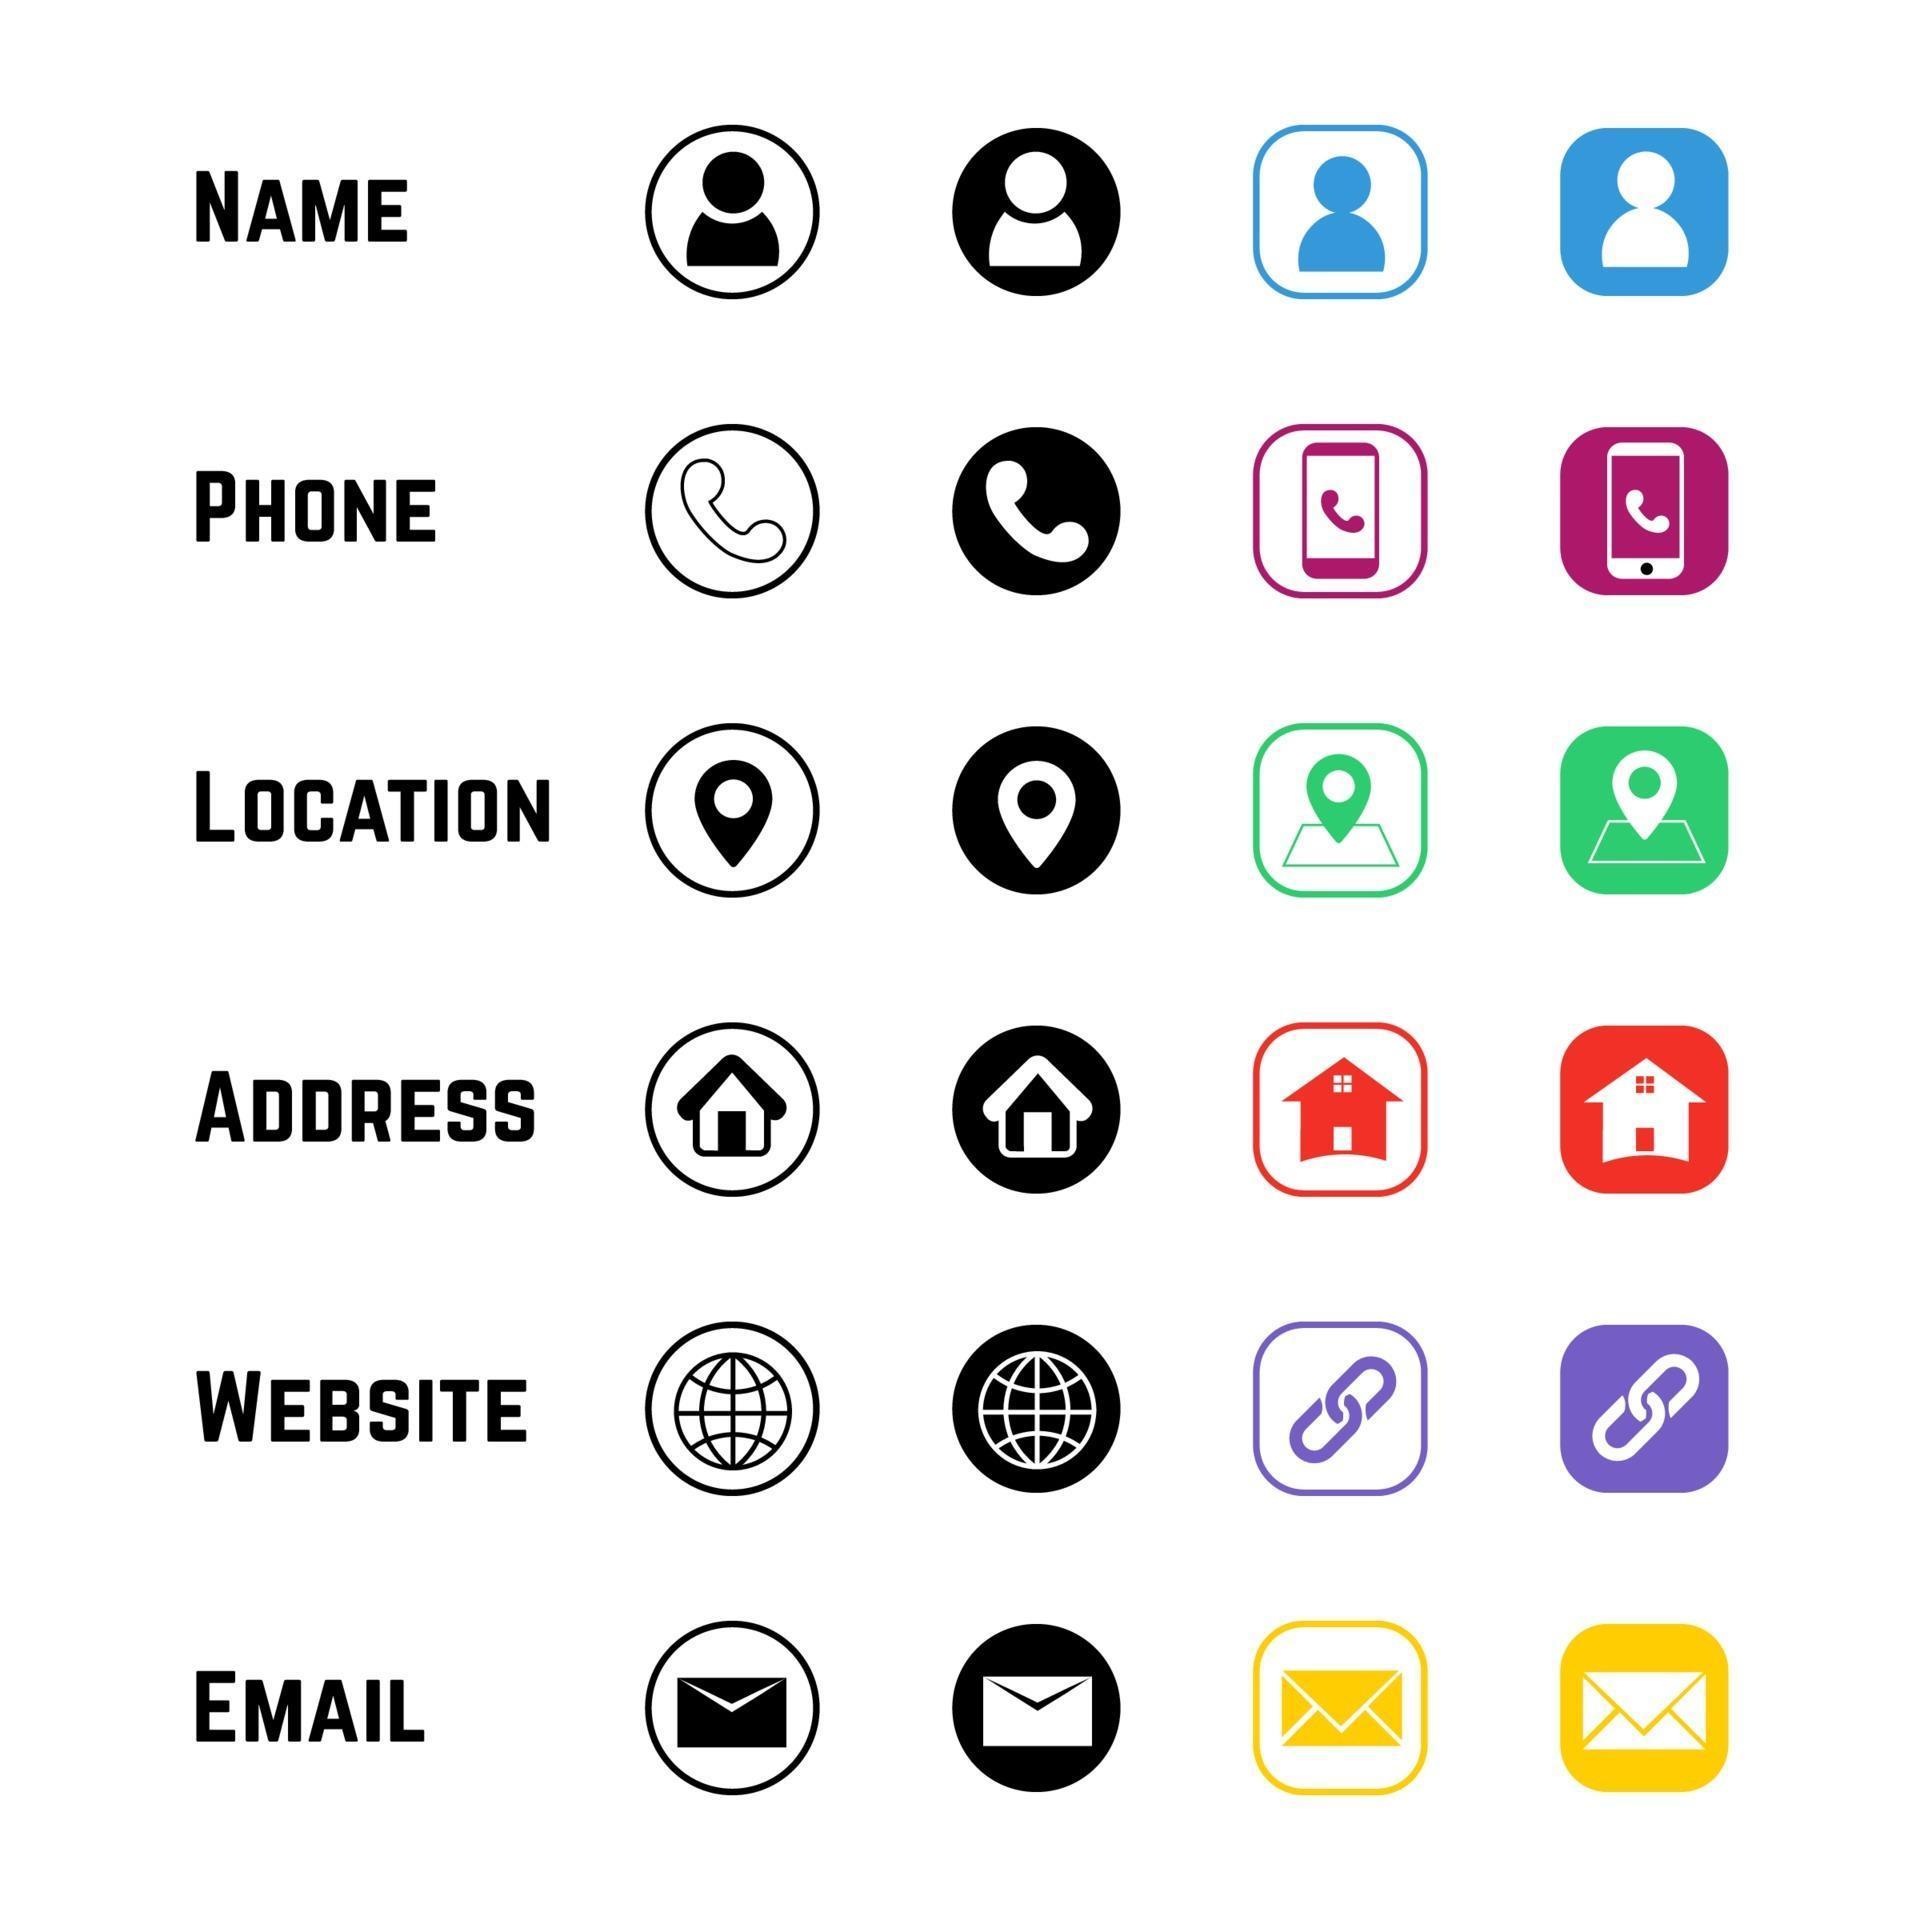 icons for business cards 3